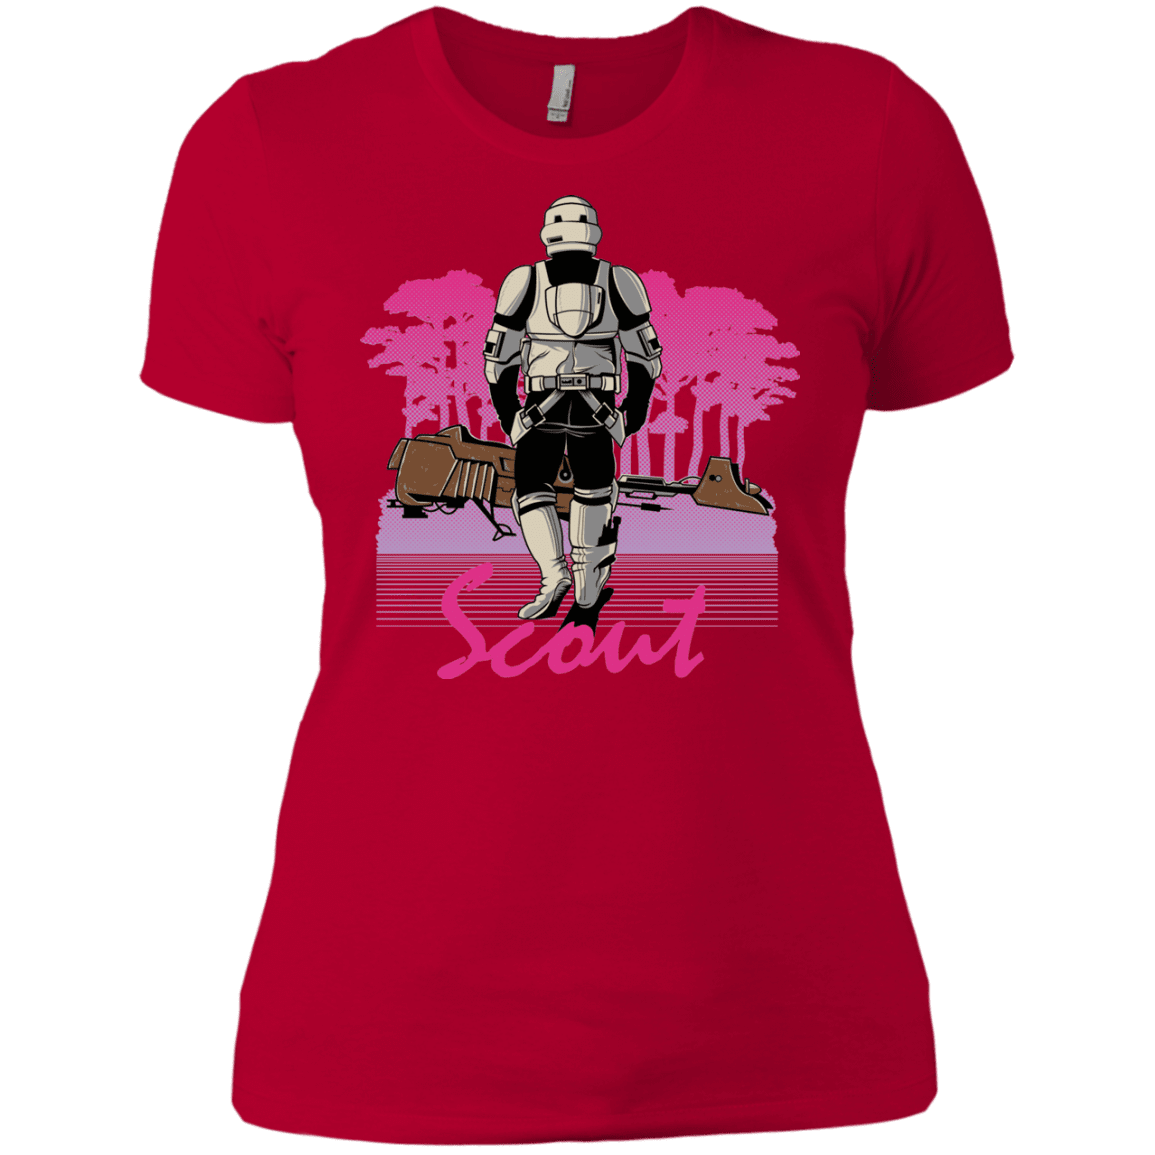 T-Shirts Red / X-Small SCOUT DRIVE Women's Premium T-Shirt